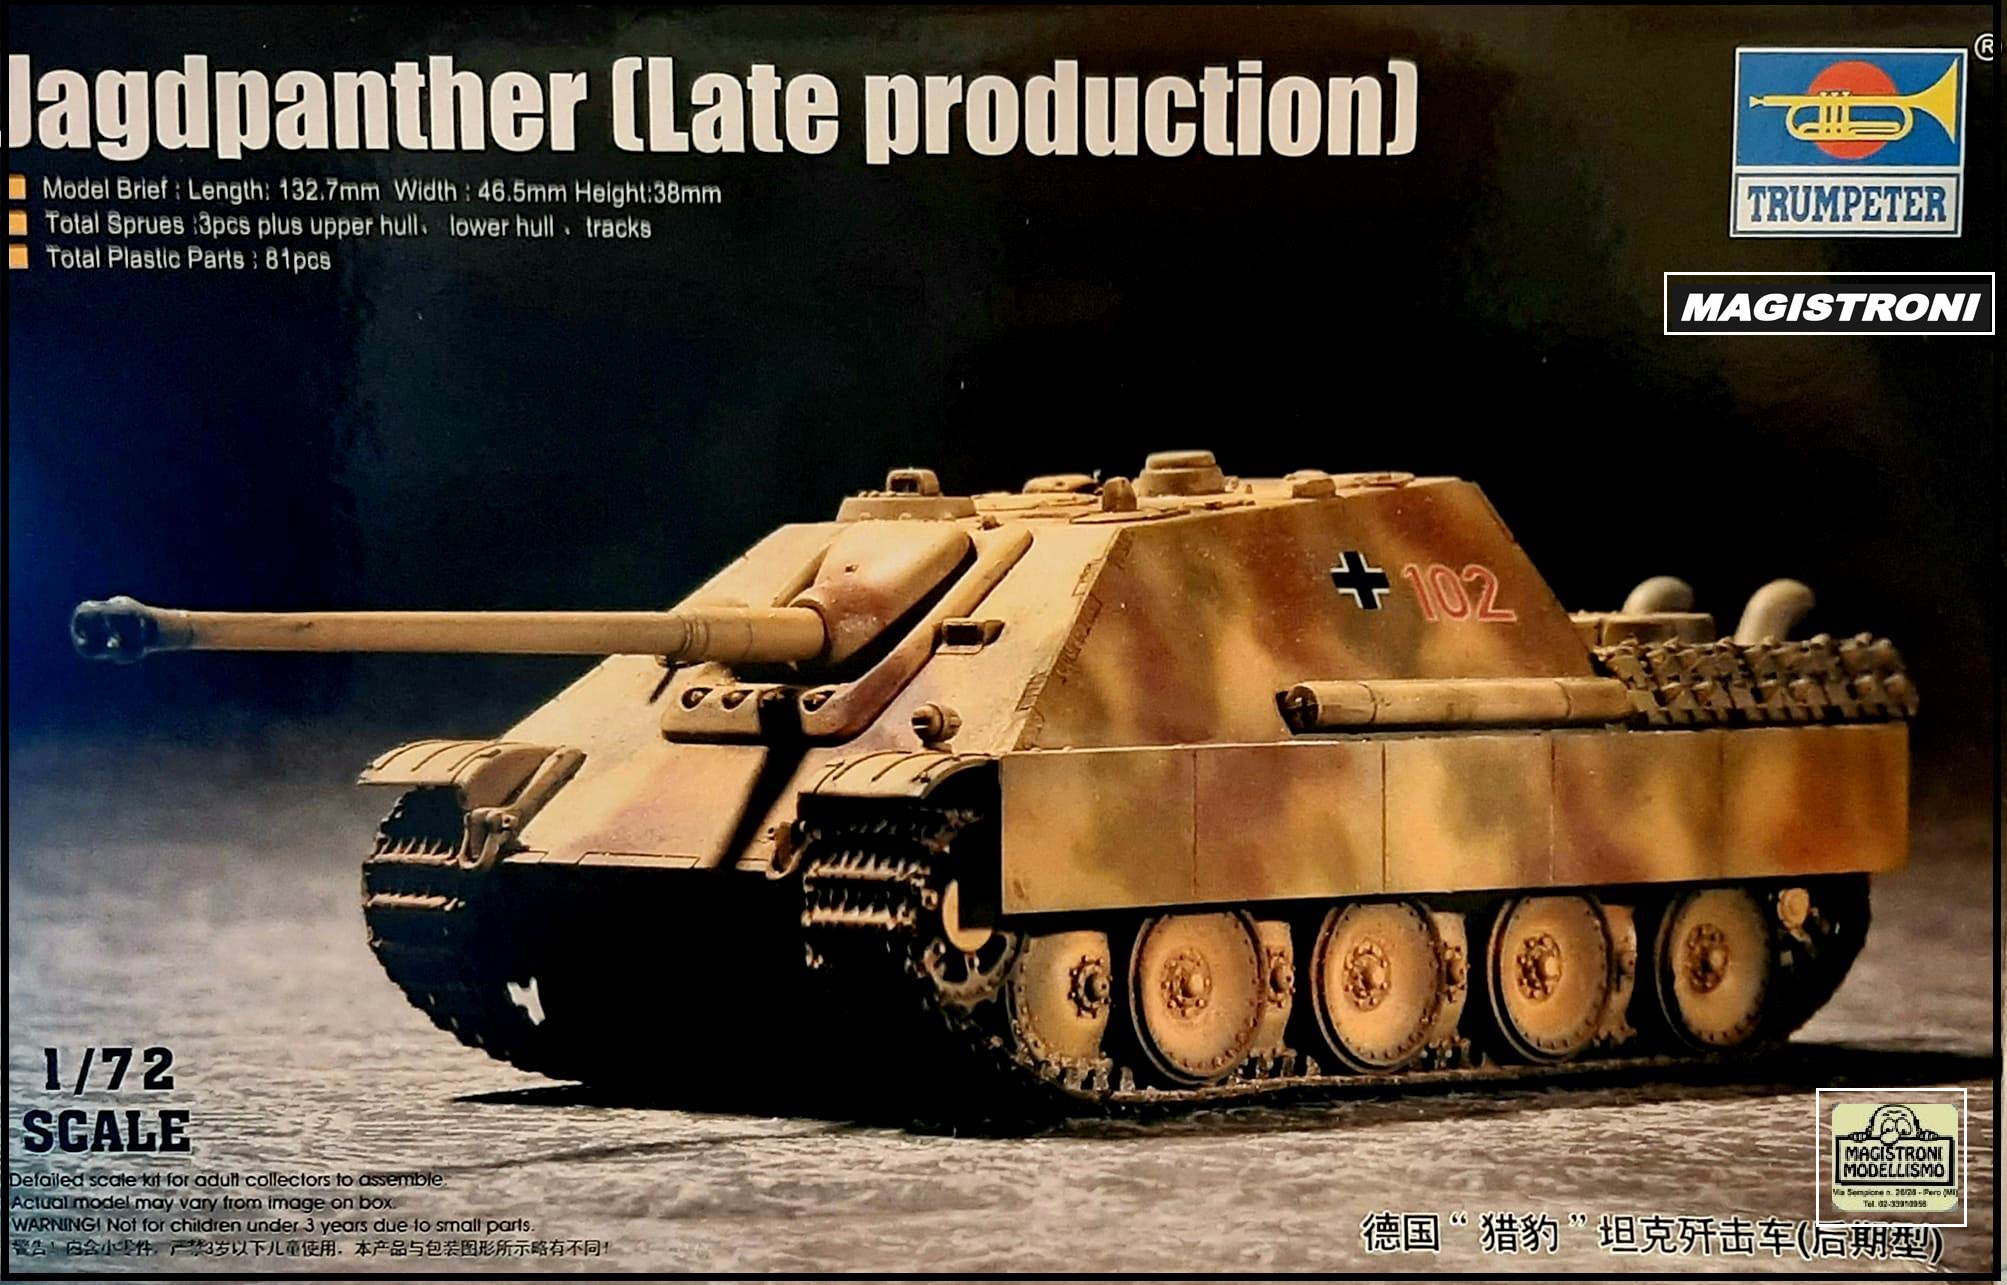 JAGDPANTHER (LATE PRODUCTION)